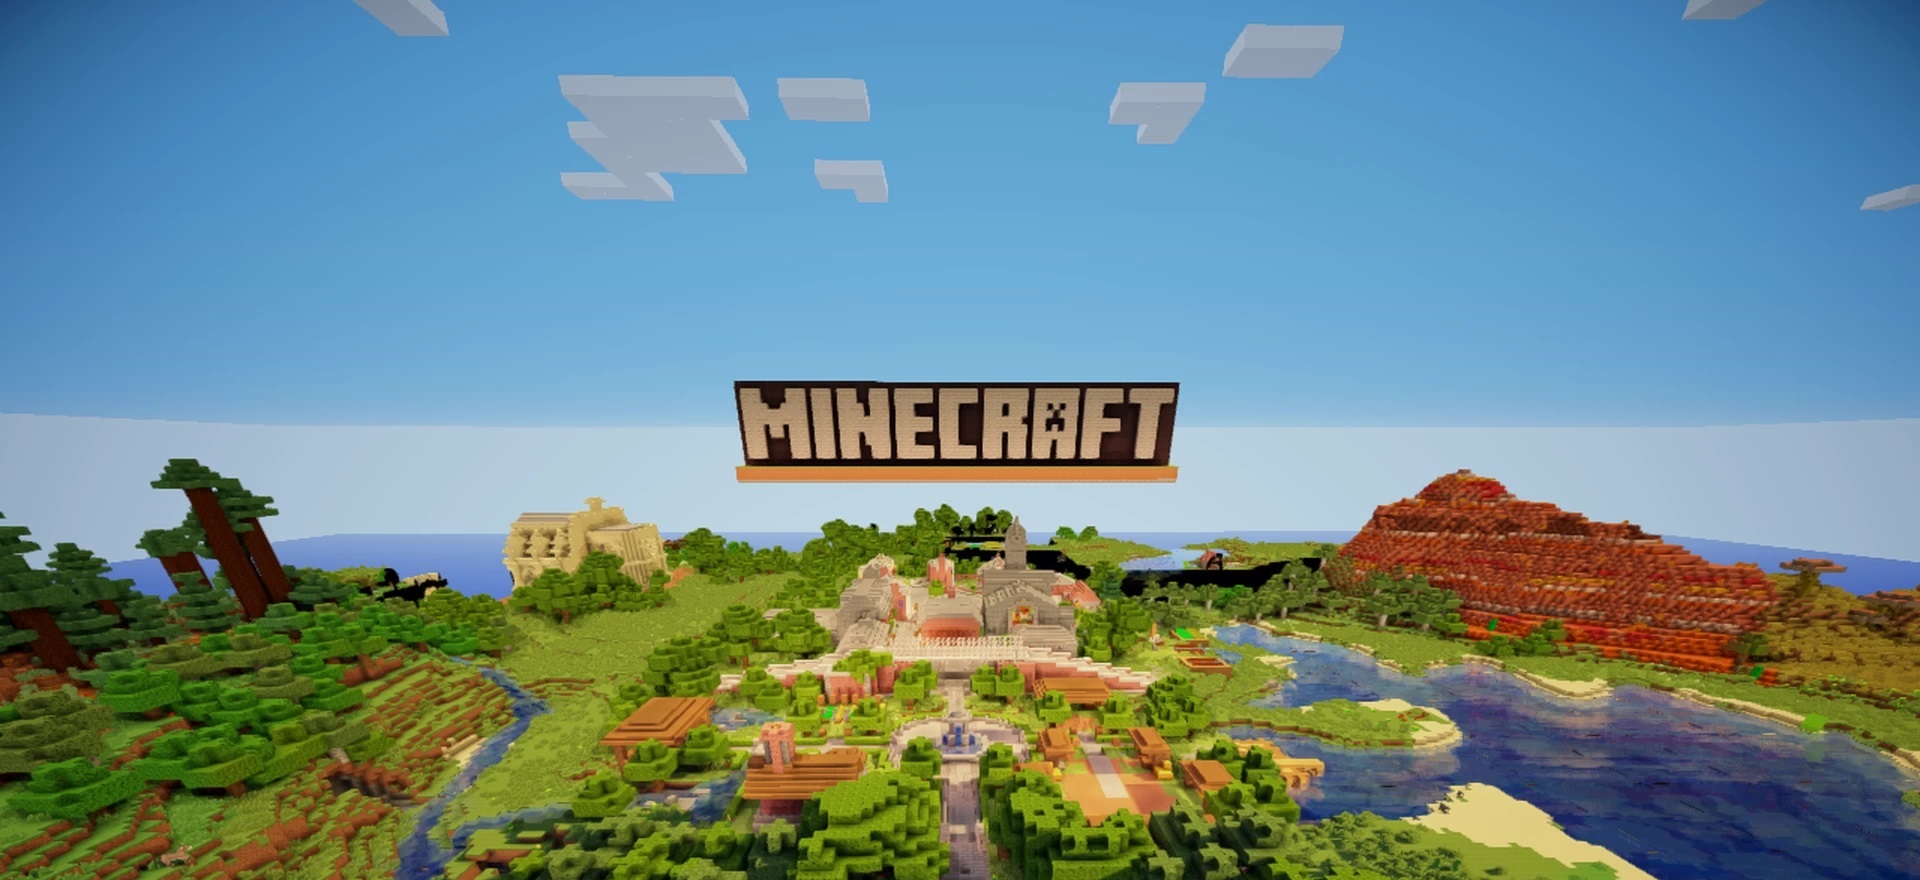 How To Download Maps For Minecraft Xbox 360